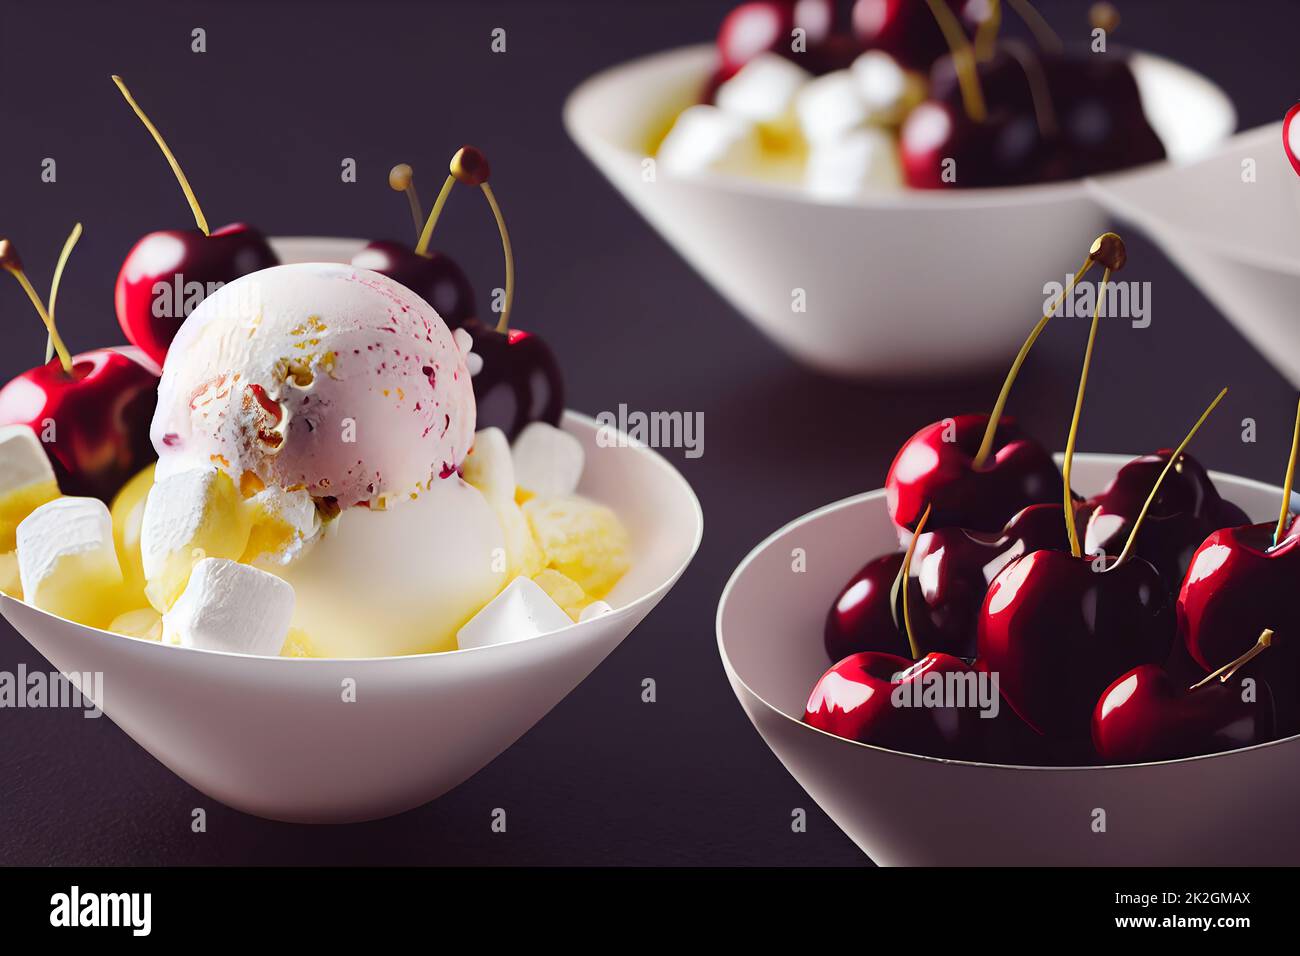 Delicious ice cream sundae with glistening cherries and marshmallows in a bowl, food photography and illustration Stock Photo